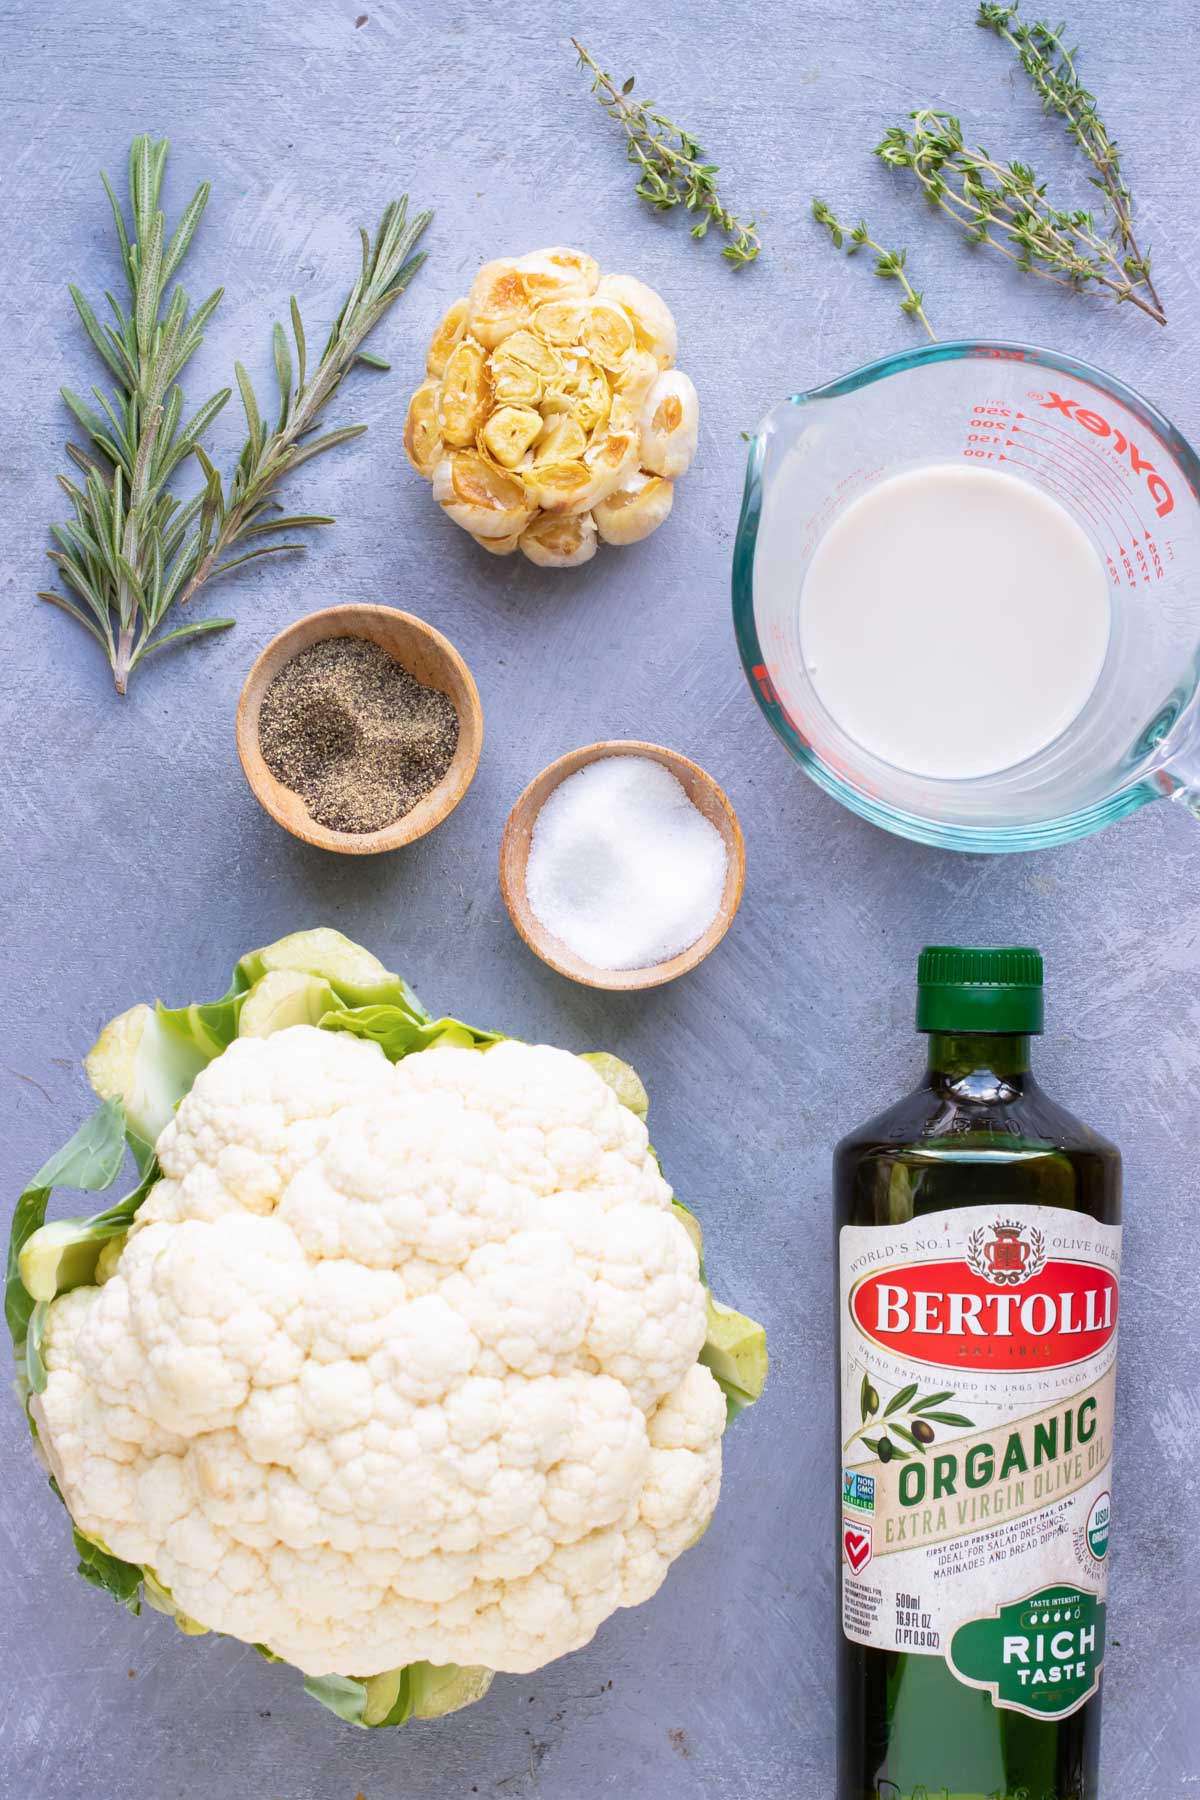 Cauliflower, garlic, oil, milk, and herbs as the ingredients for the best mashed cauliflower potatoes recipe.